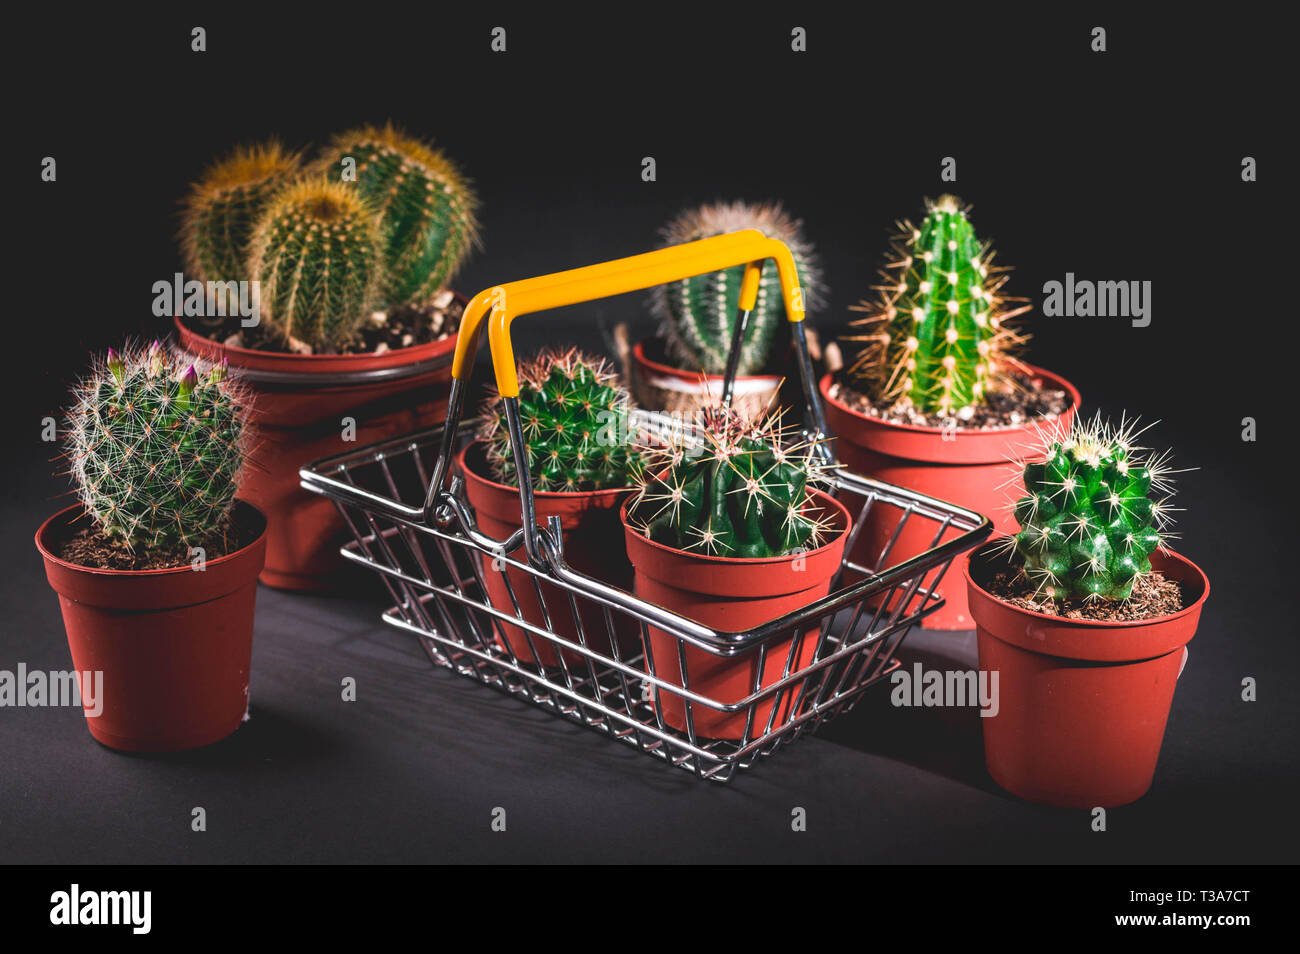 Cacti collection on dark background. Low key lighting Stock Photo